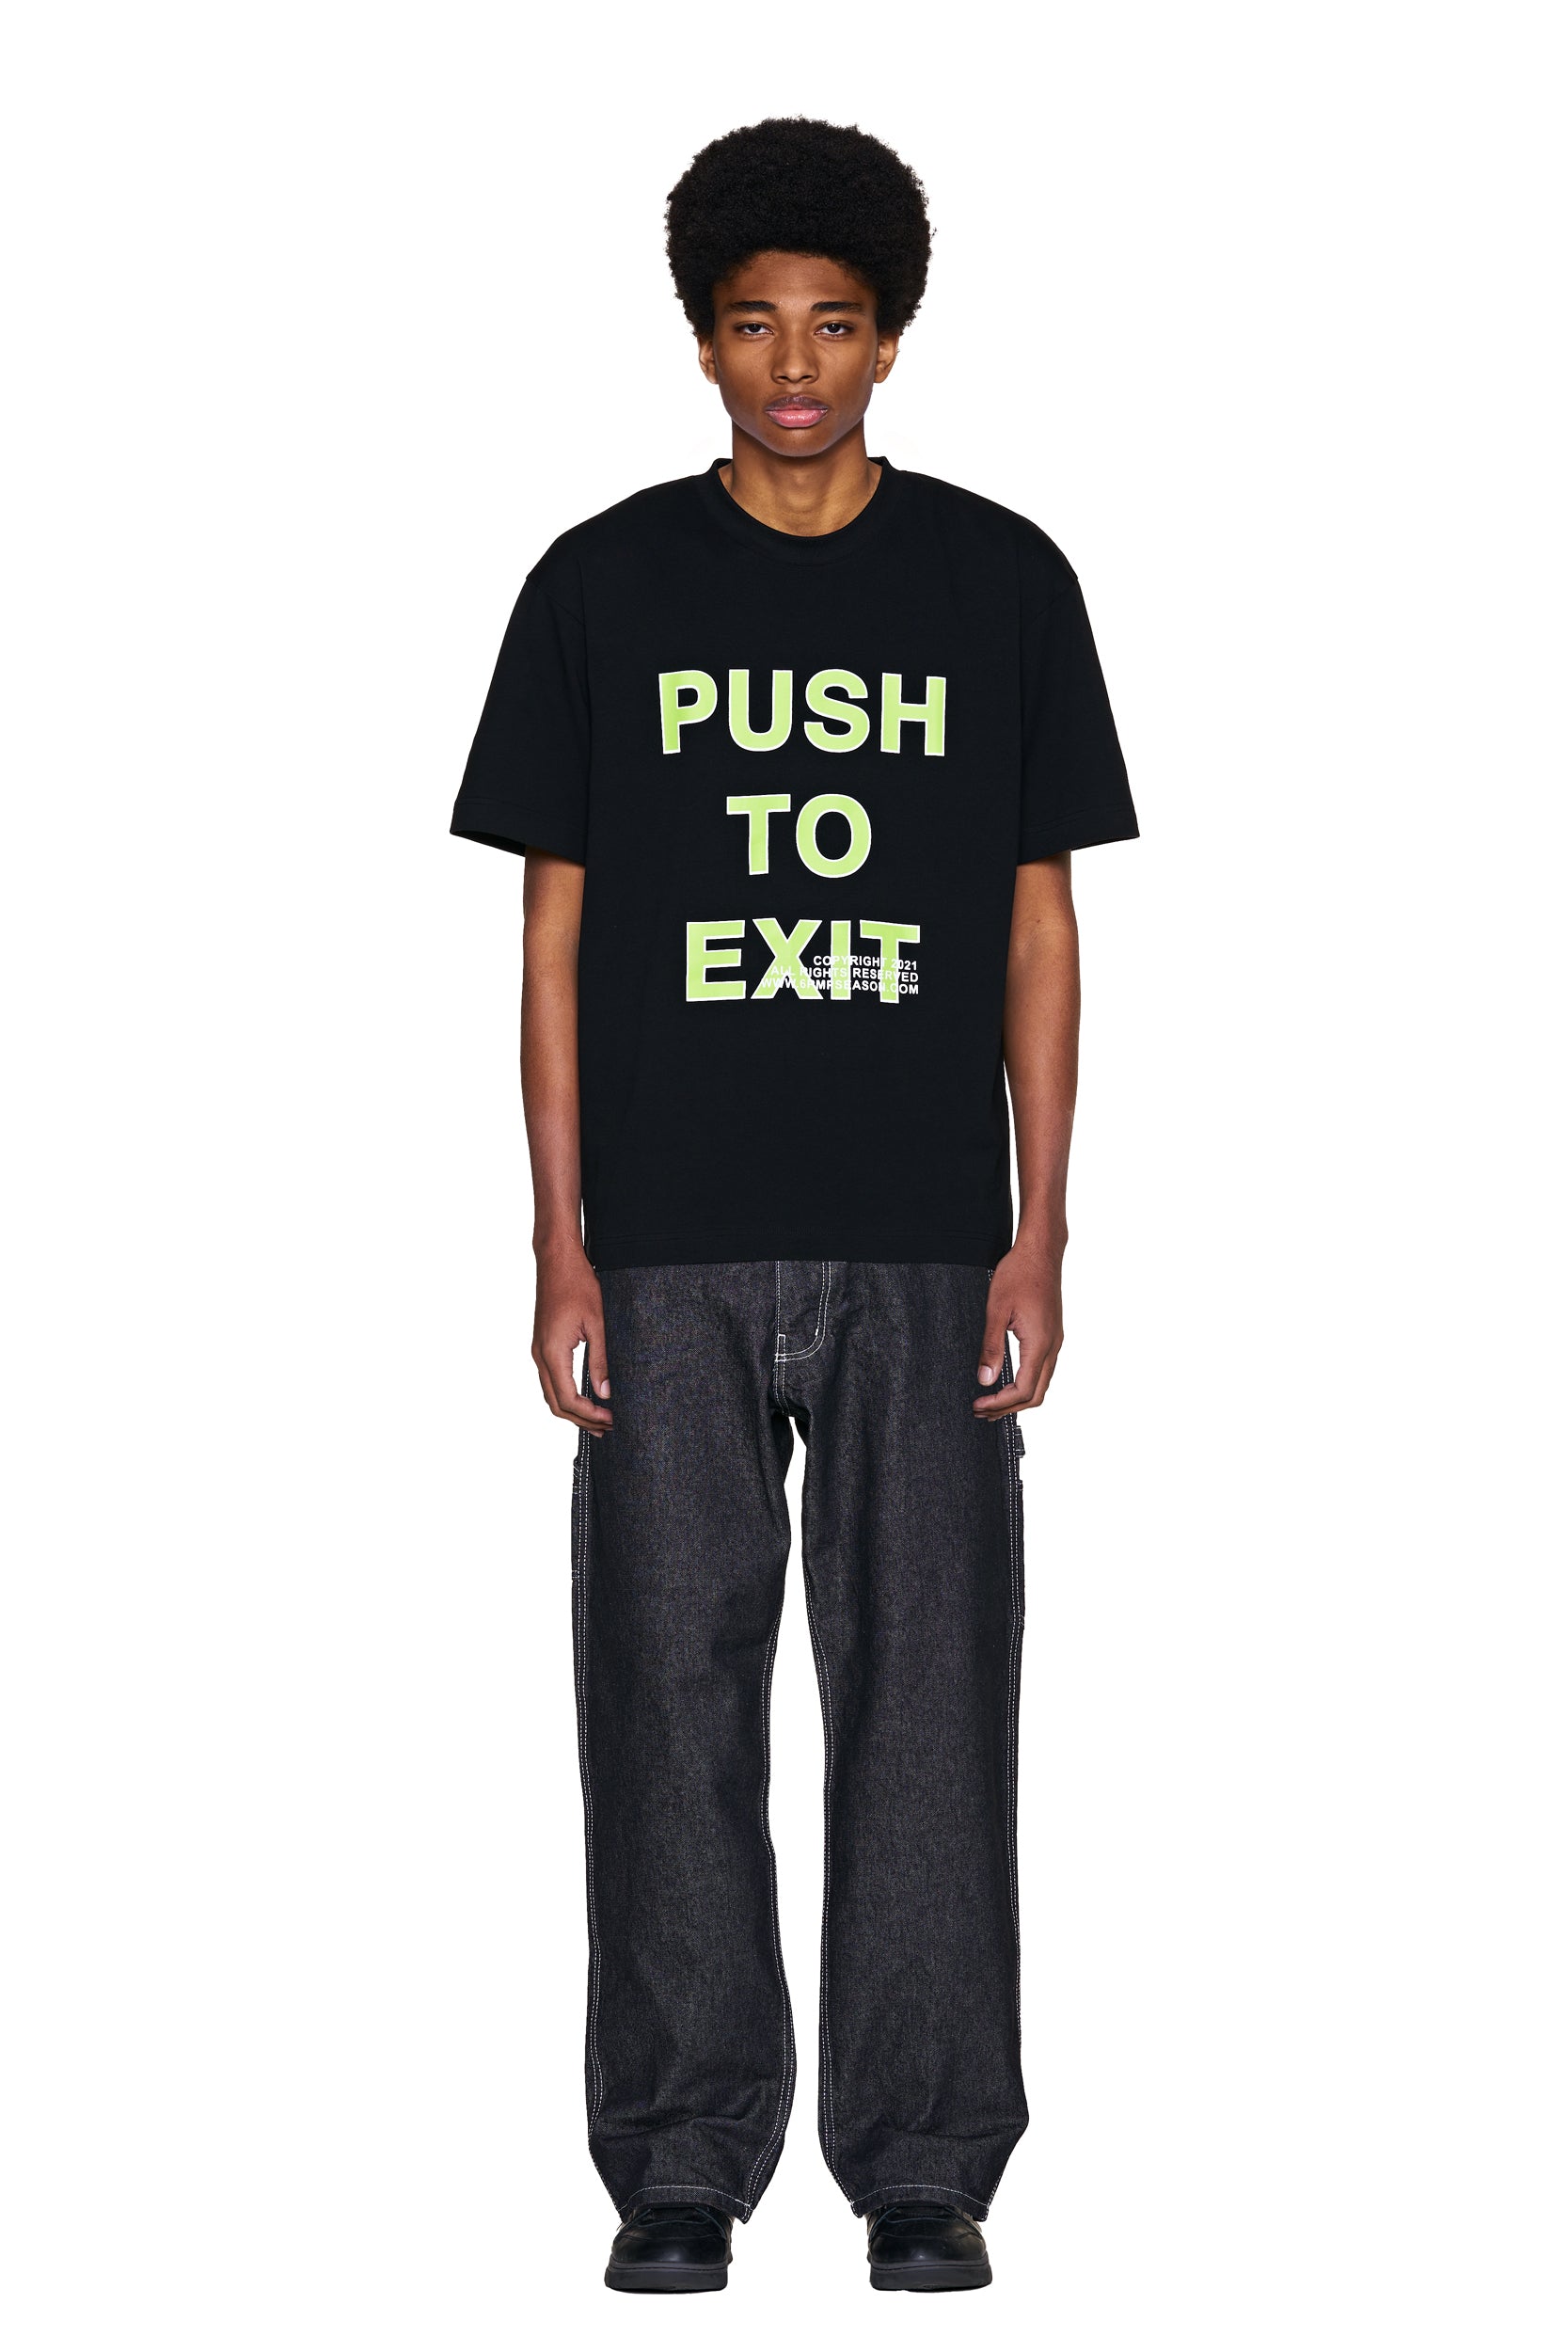 PUSH TO EXIT T-SHIRT 2.0